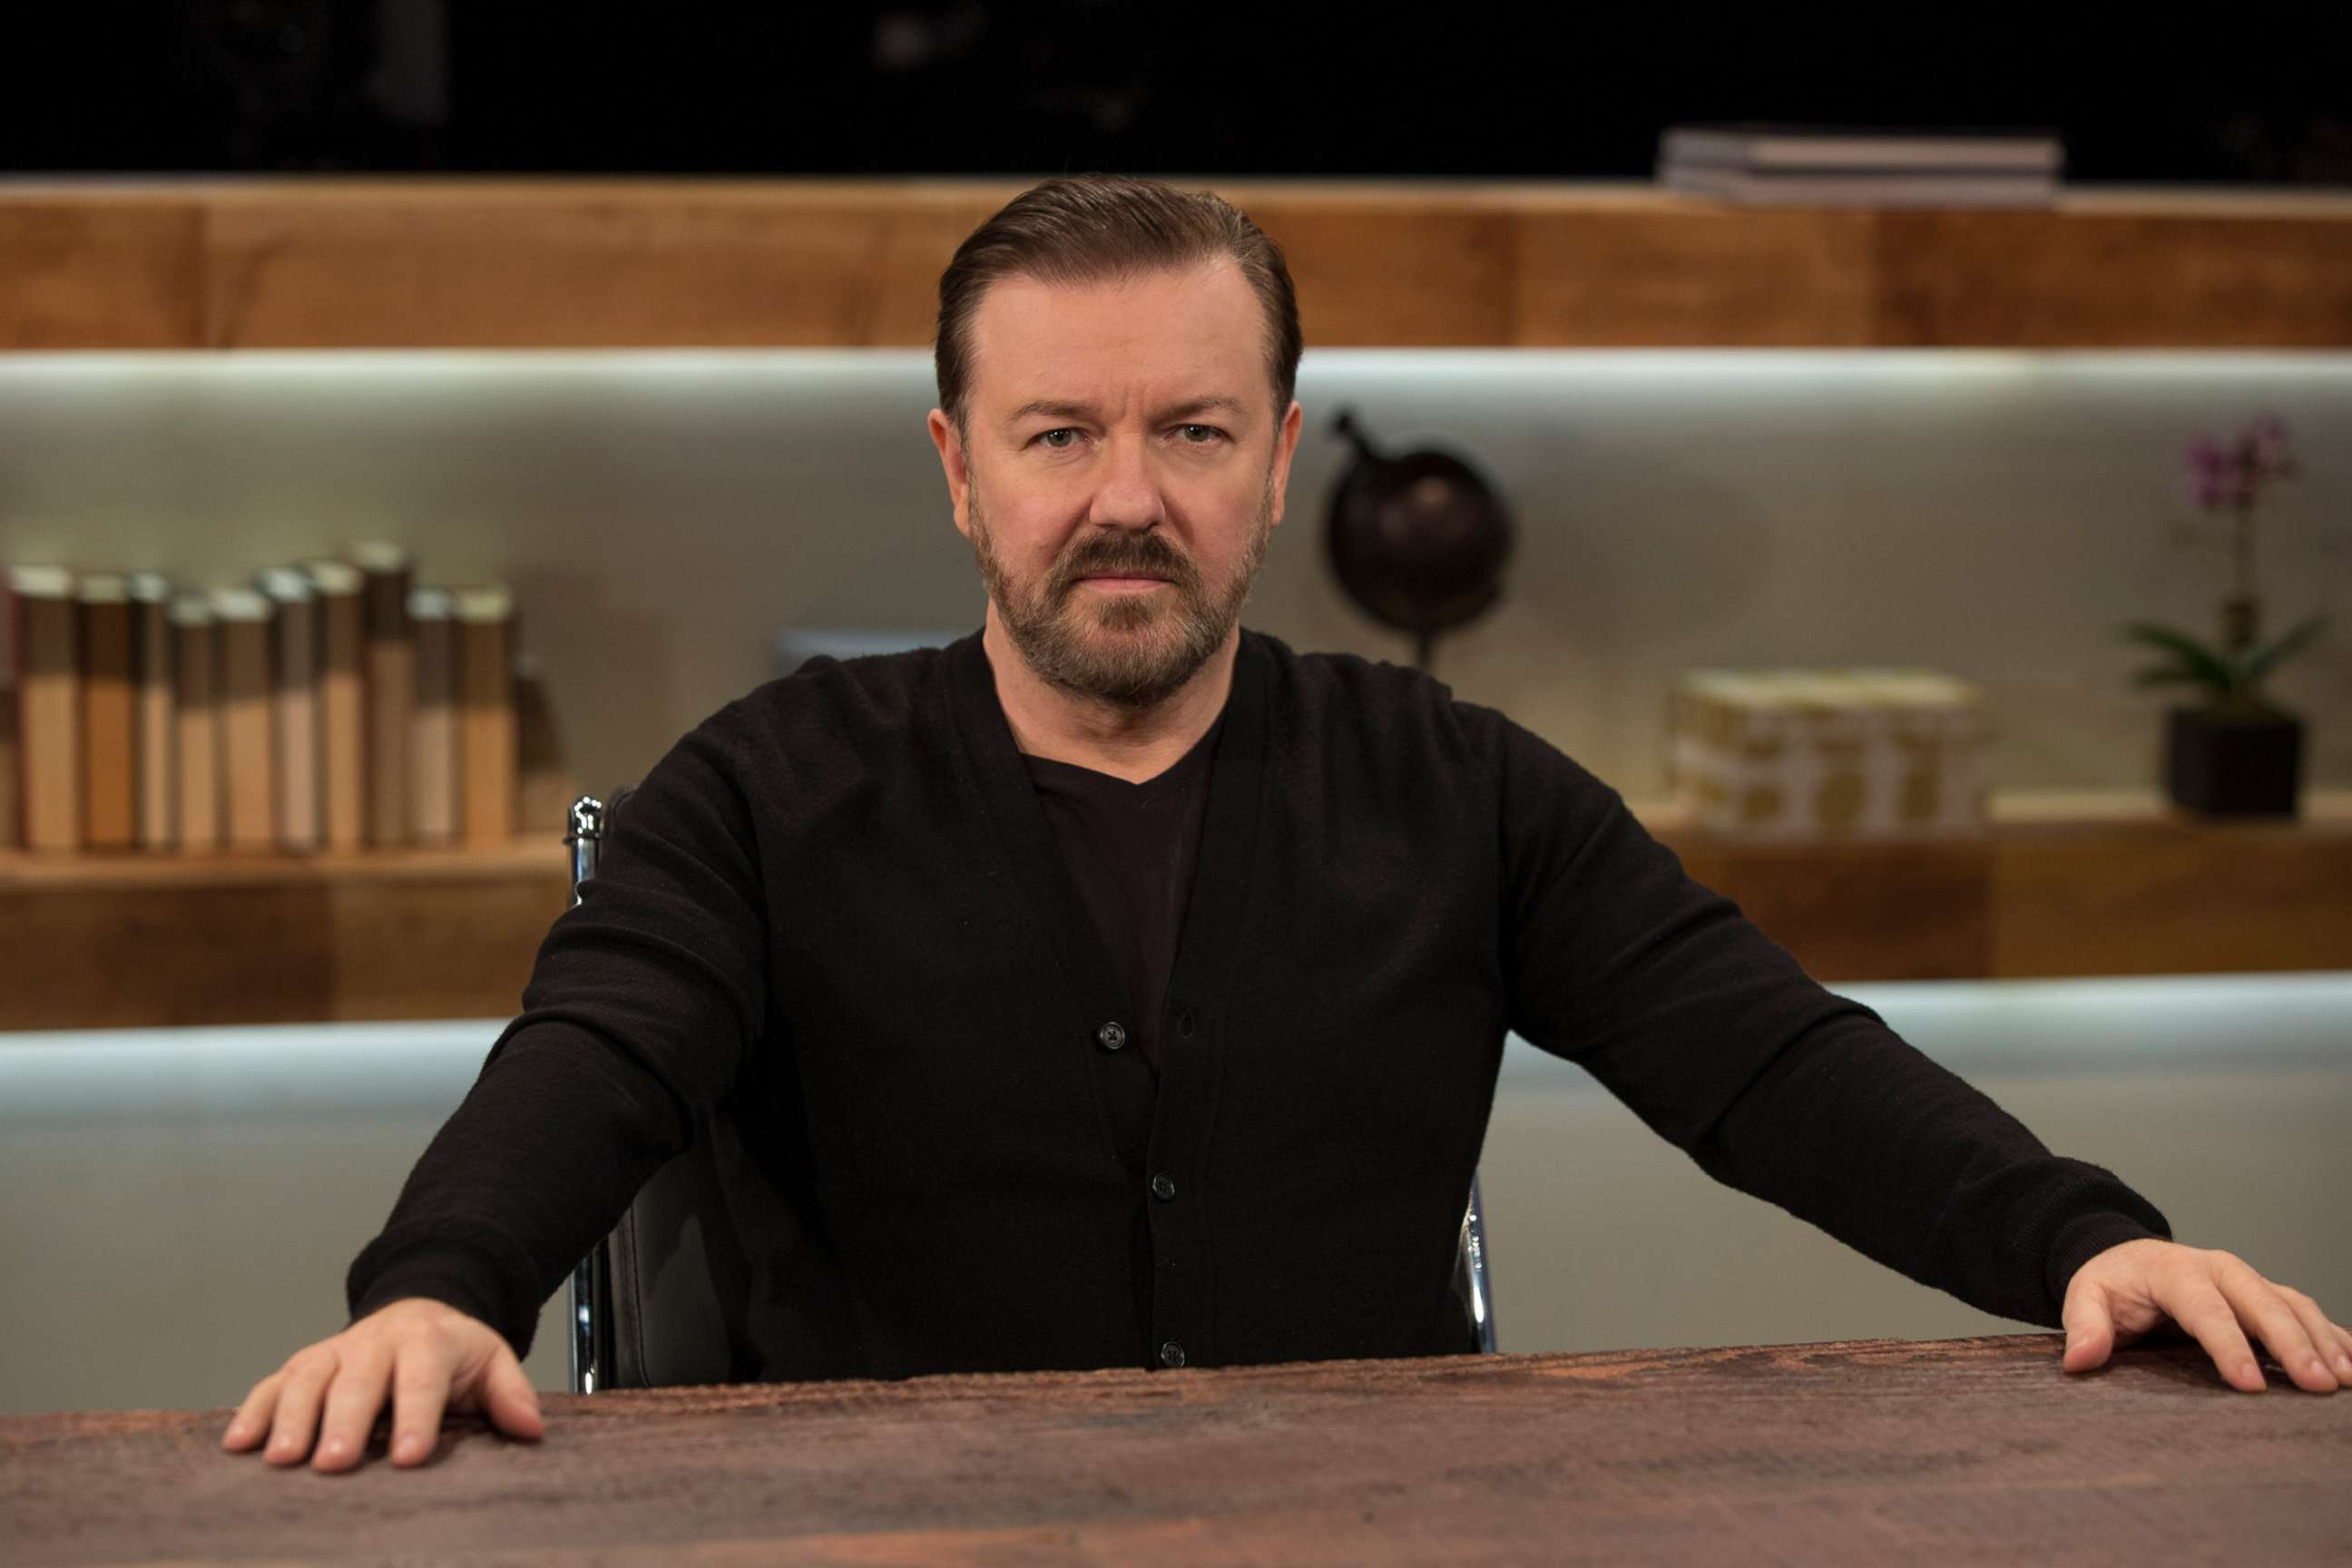 PHOTO: Ricky Gervais is shown on the set of the television show "Child Support".